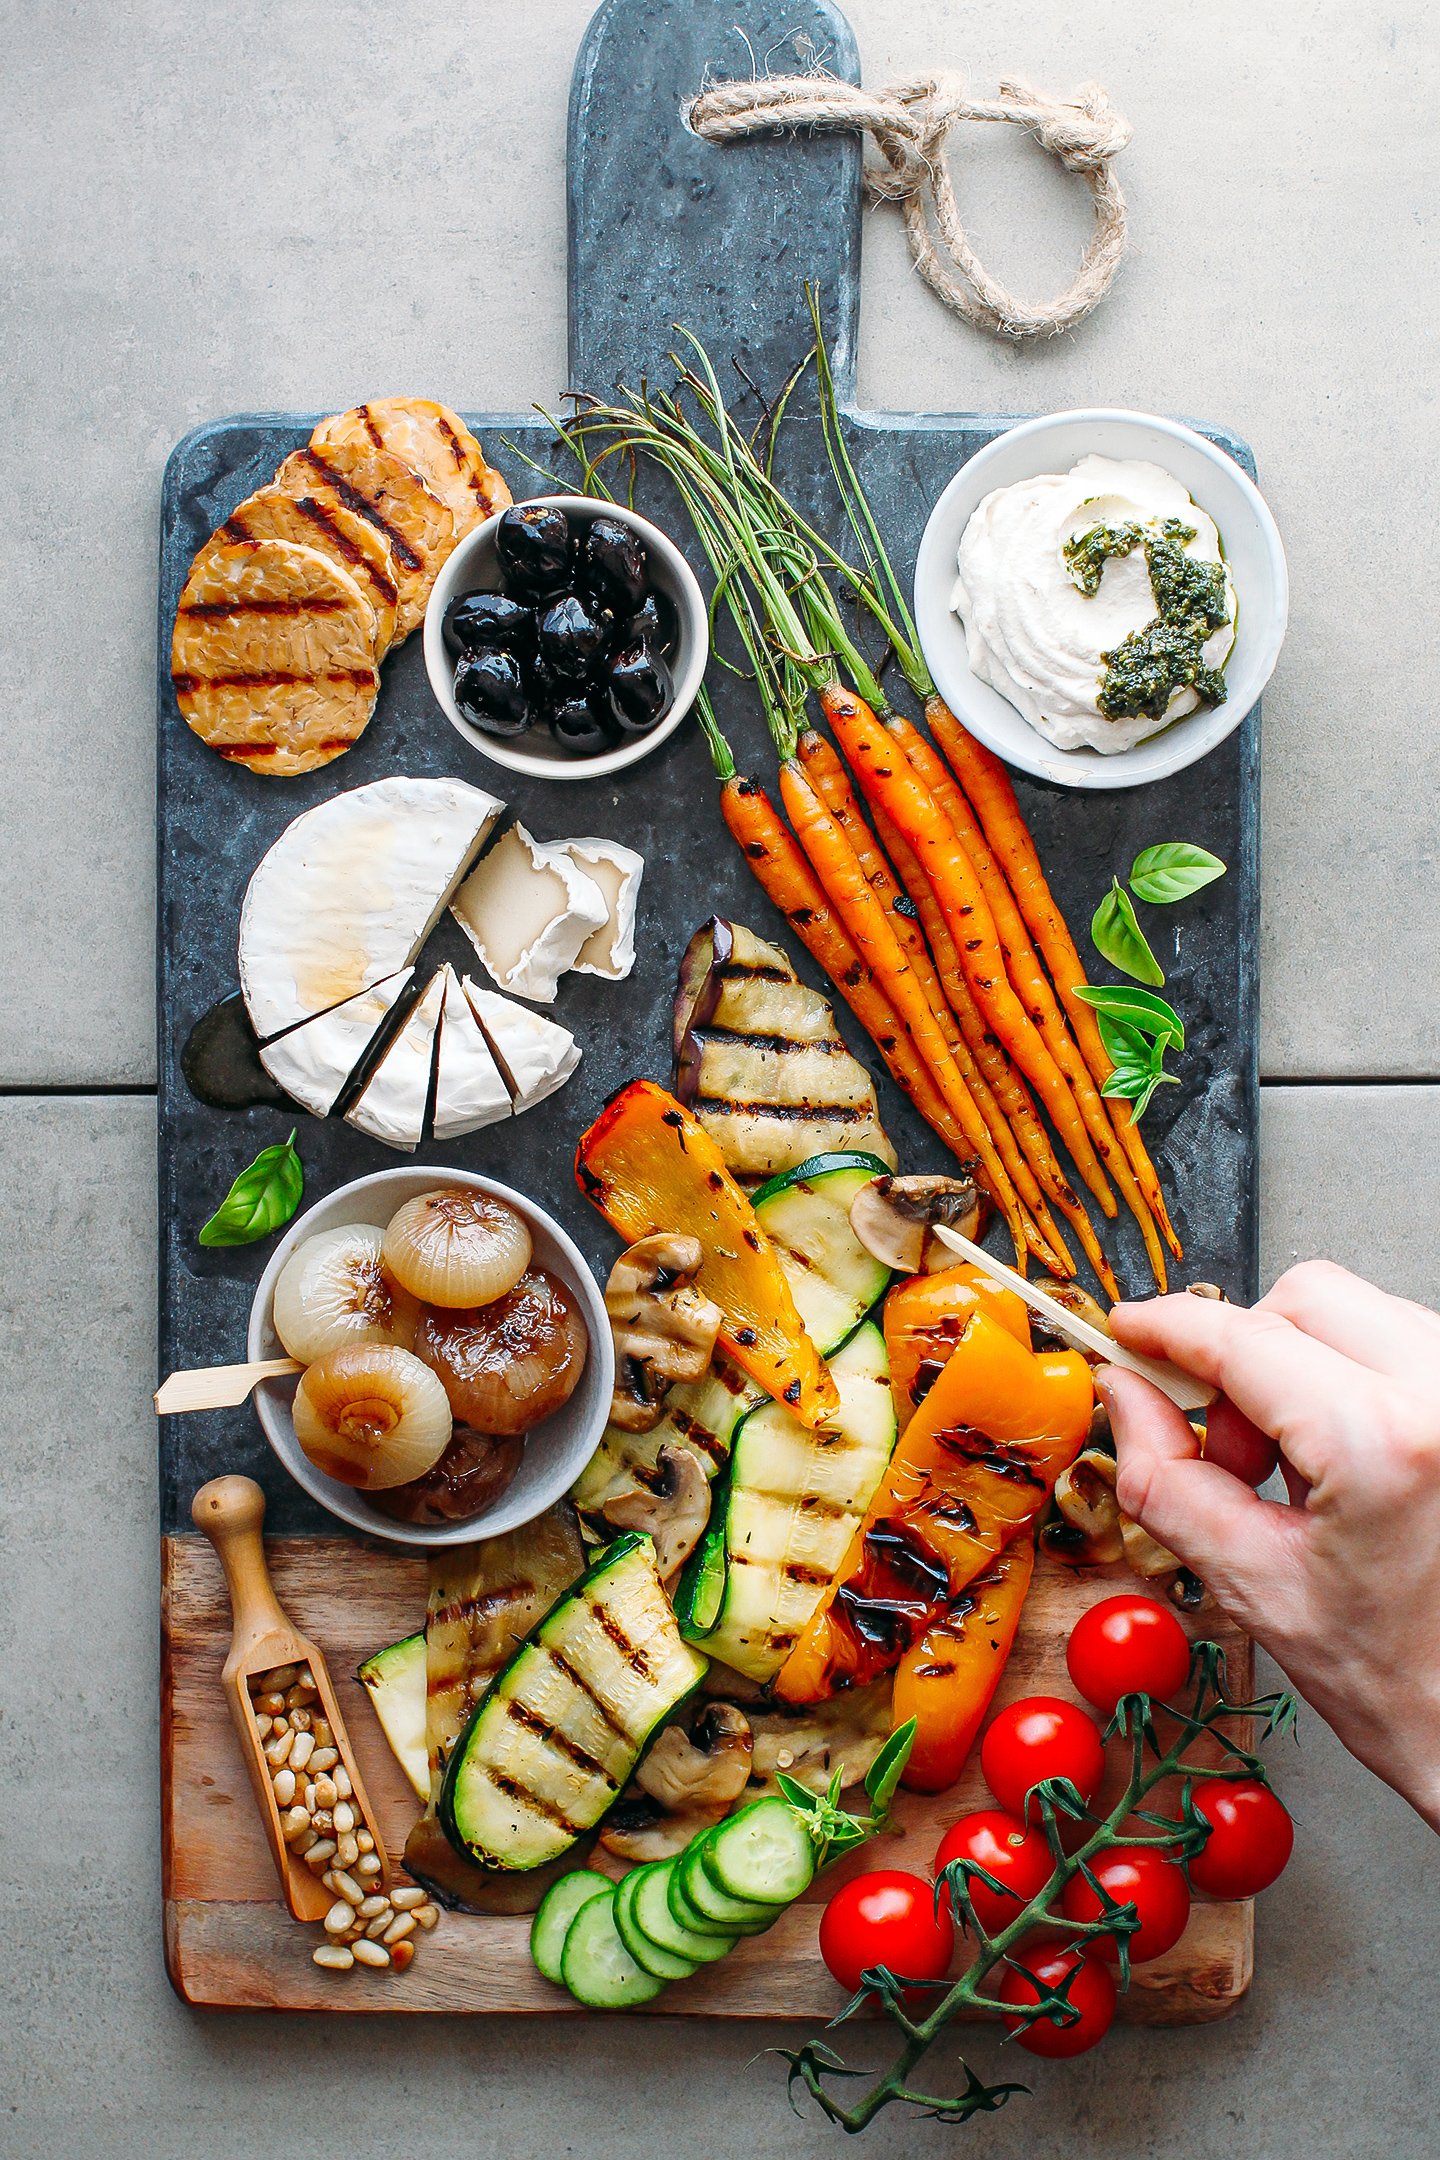 Loaded vegan antipasto platter with grilled veggies, cheeses, and nuts.